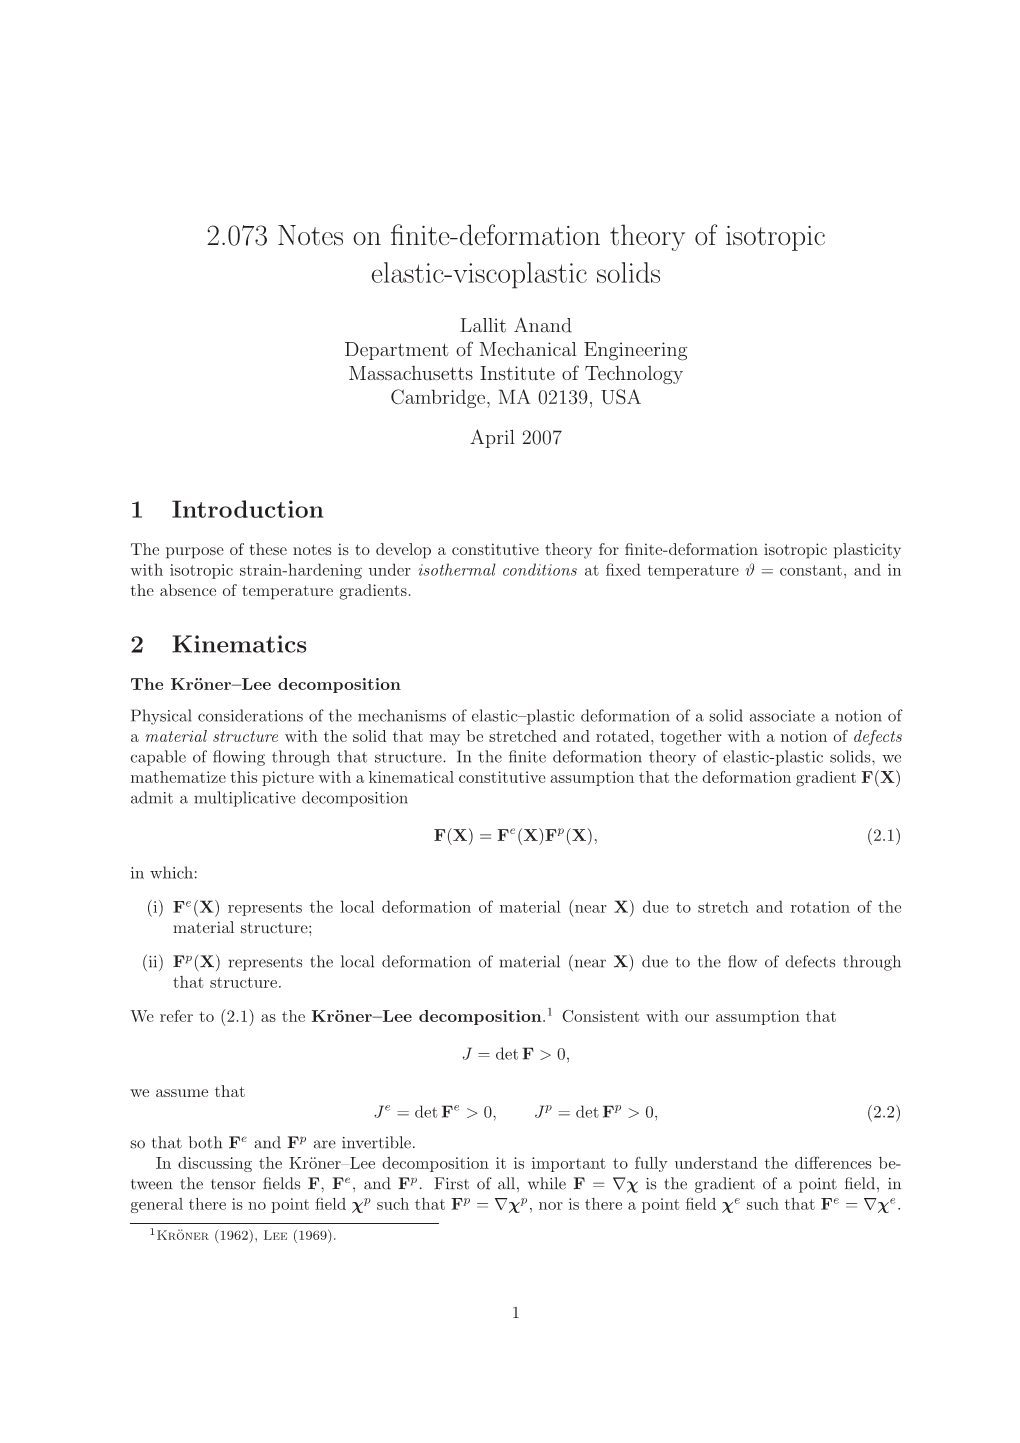 2.073 Notes on Finite-Deformation Theory of Isotropic Elastic